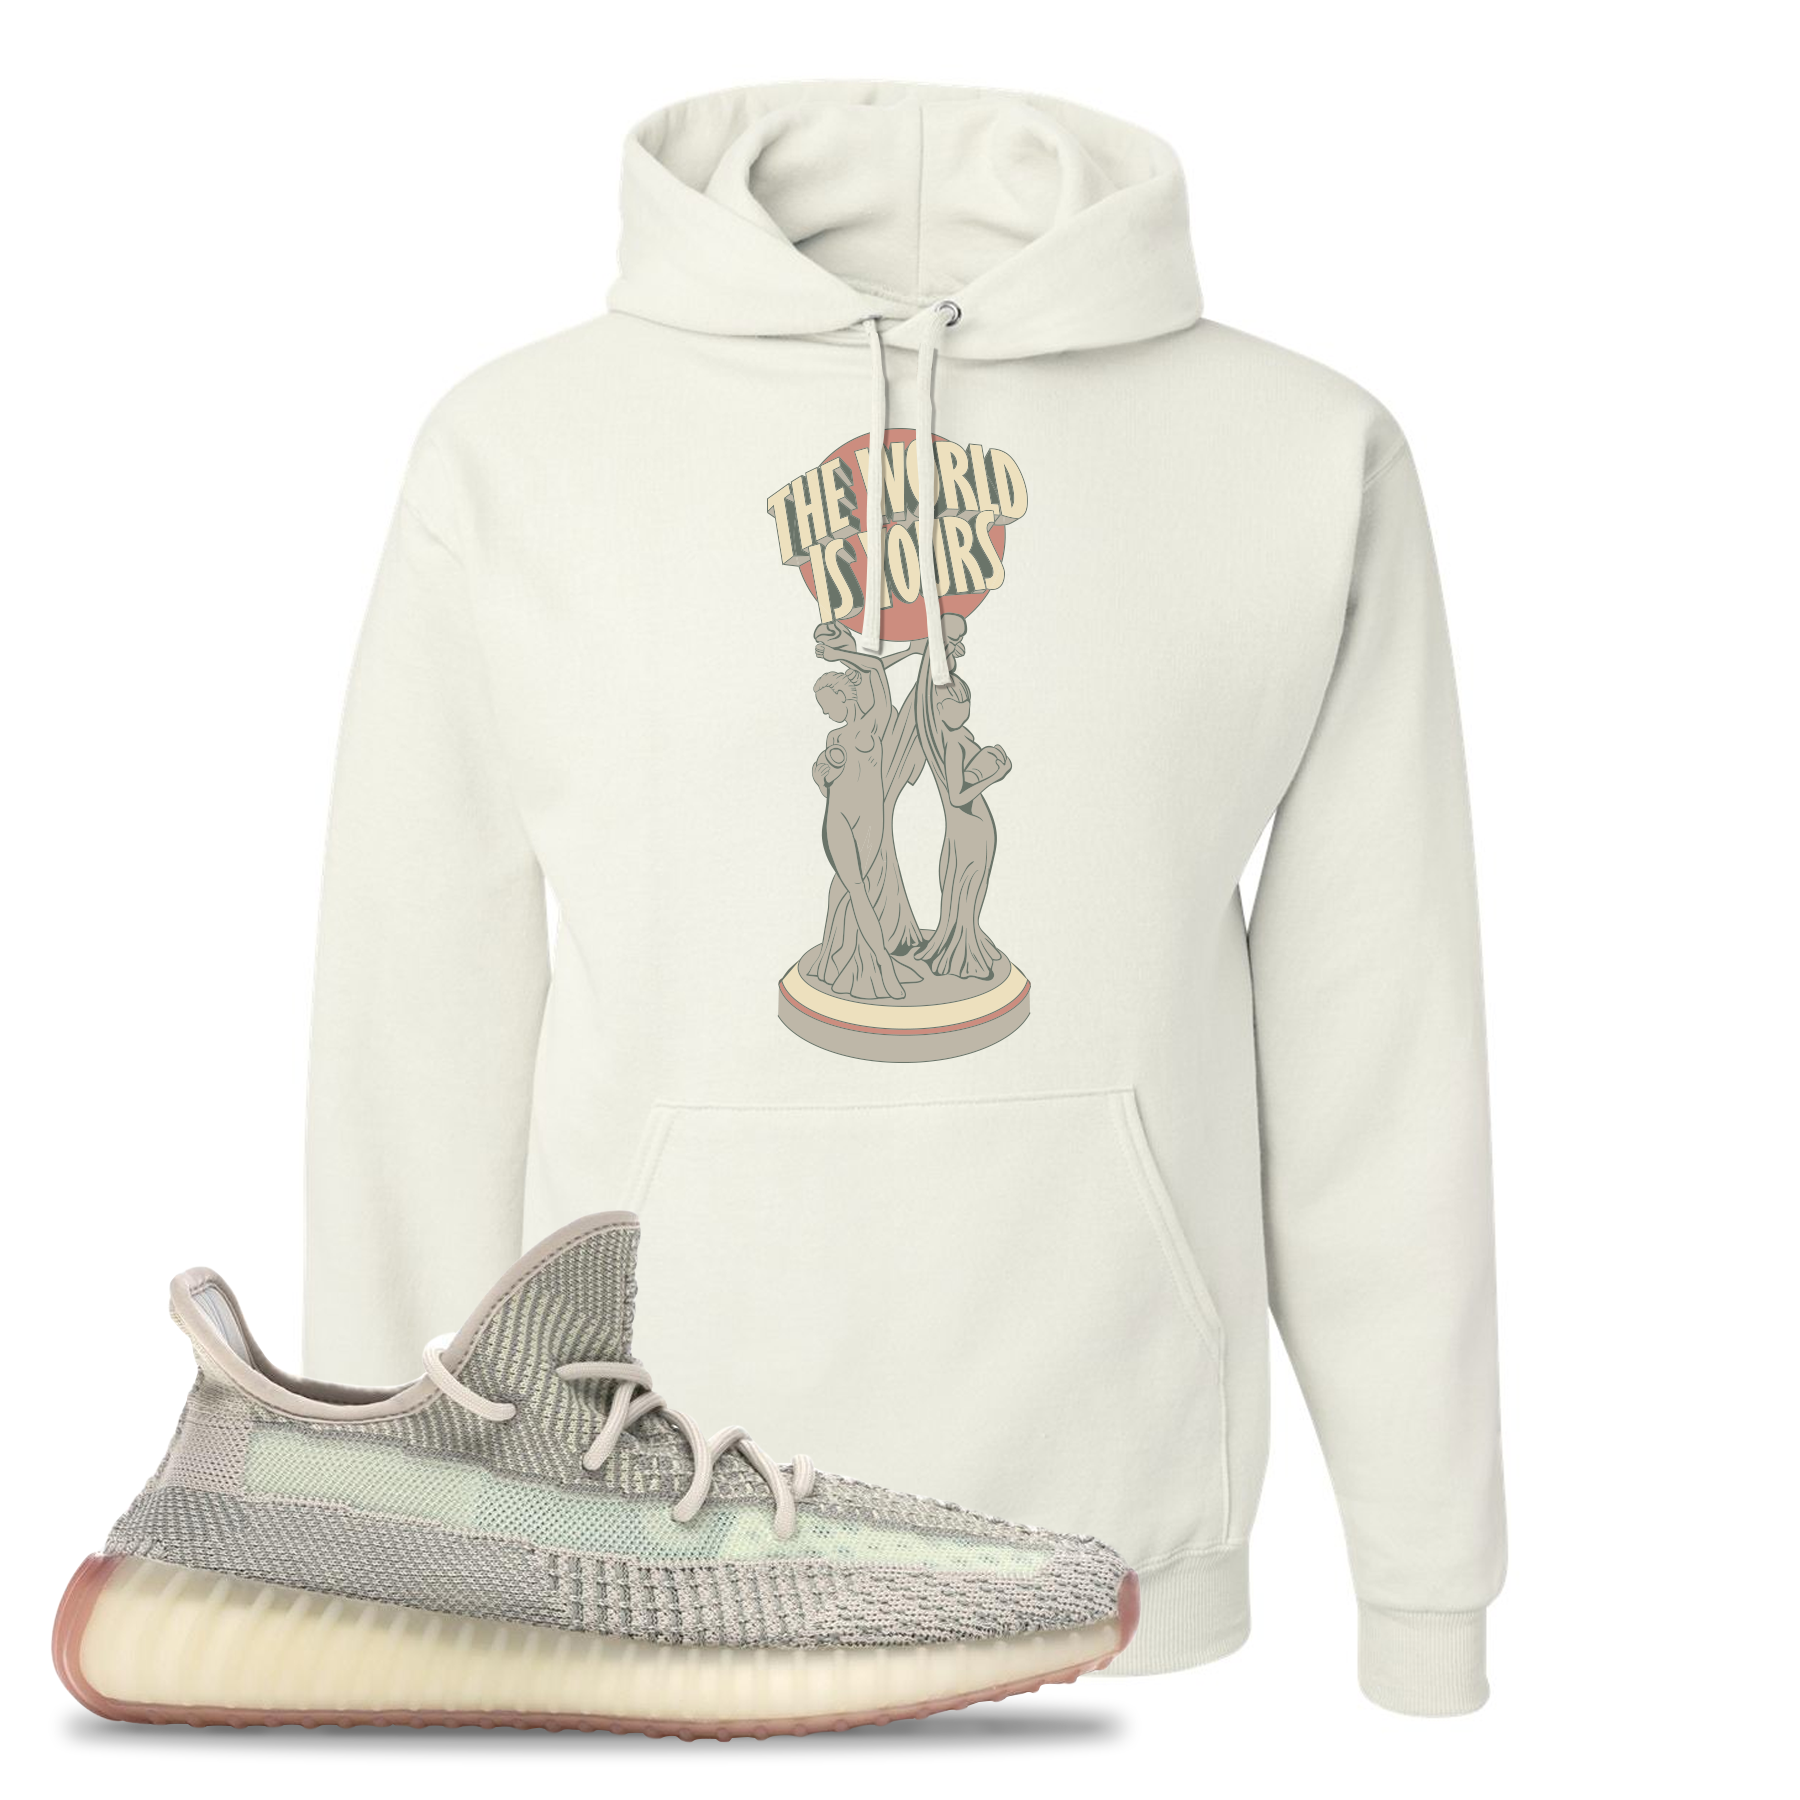 Yeezy Boost 350 V2 Citrin Non-Reflective The World Is Yours Statue White Sneaker Matching Pullover Hoodie